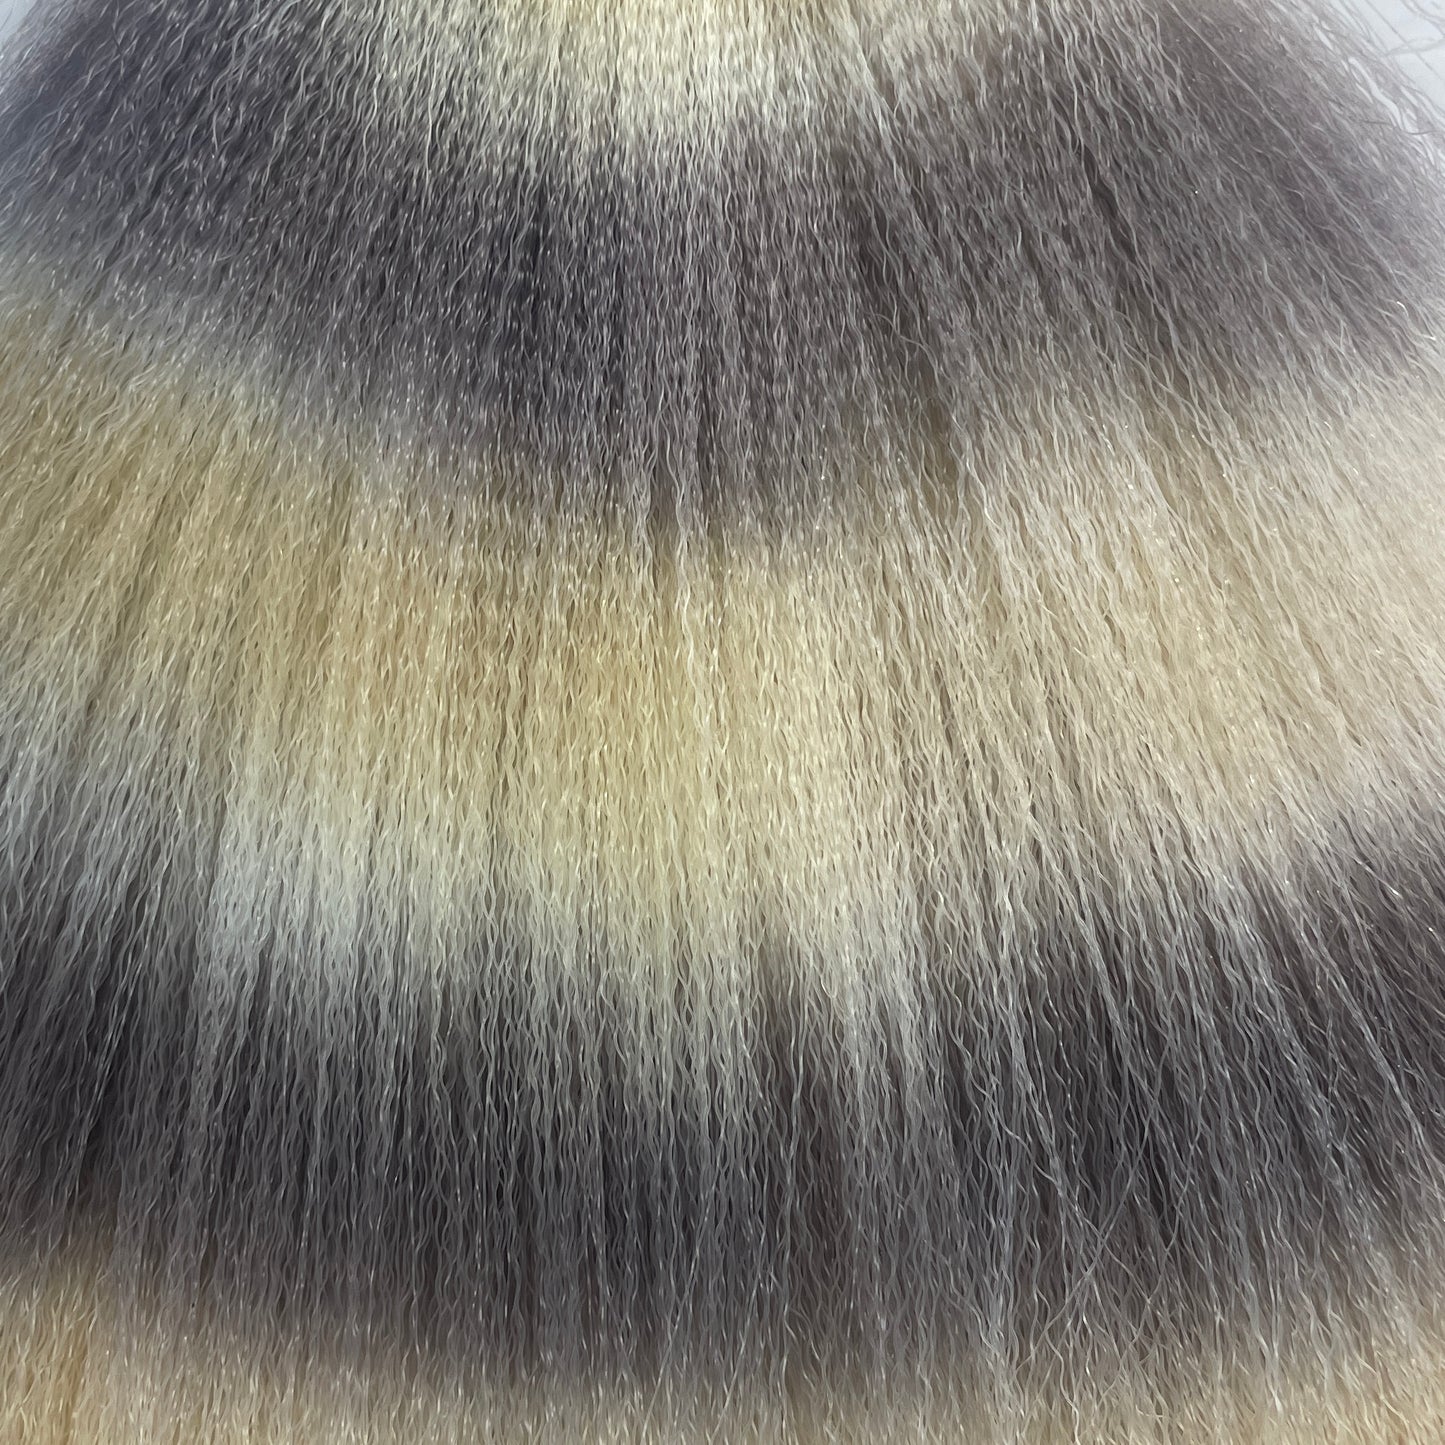 SPECIALTY DYED CRIMPED NYLON HAIR 8"